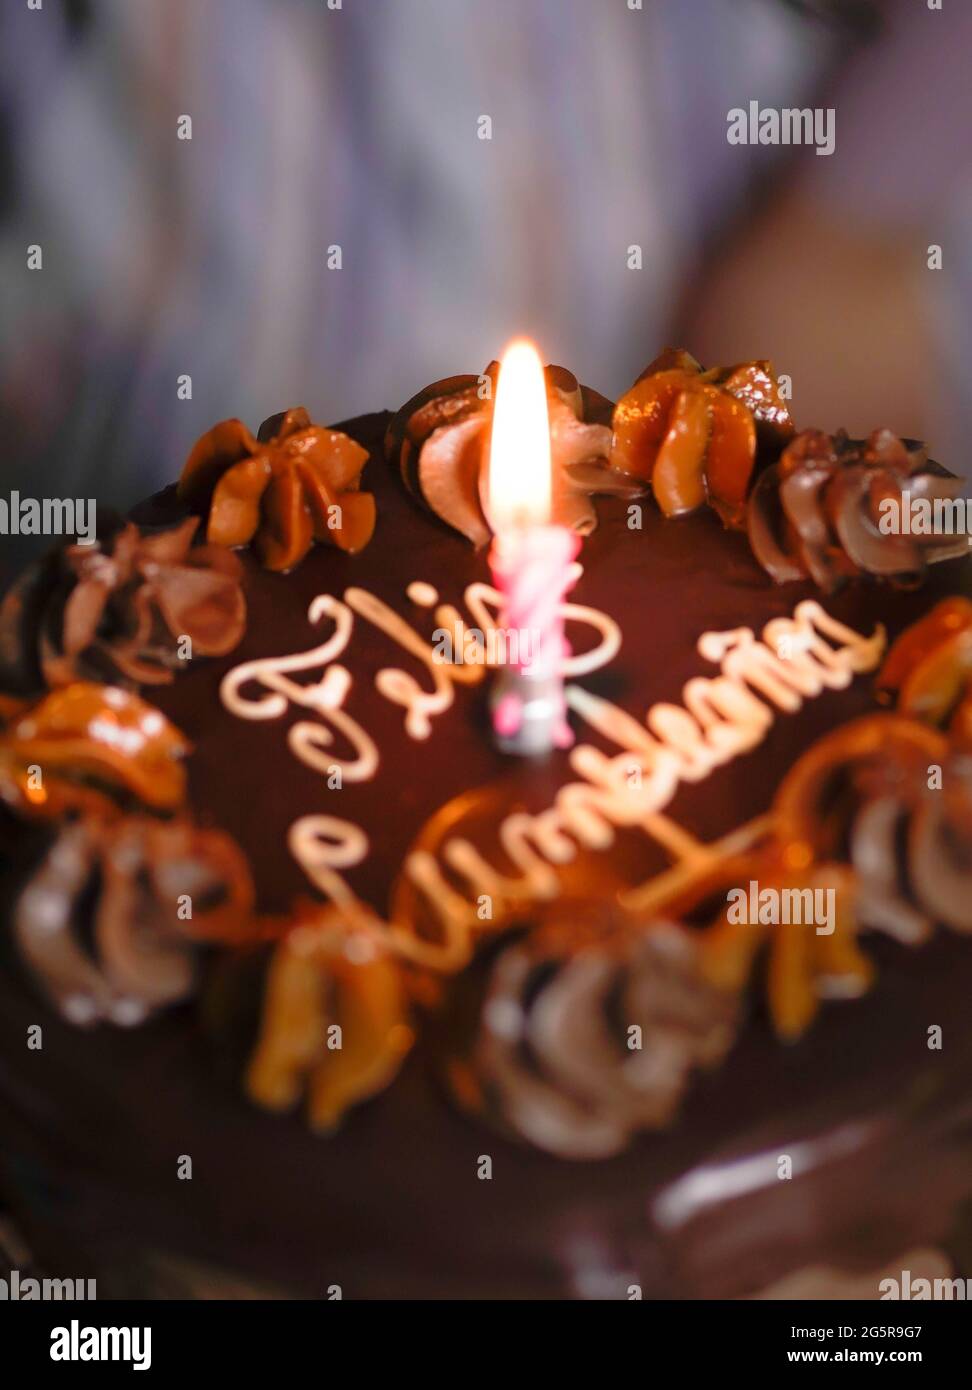 cute girls celebrated their birthday with a chocolate cake ...